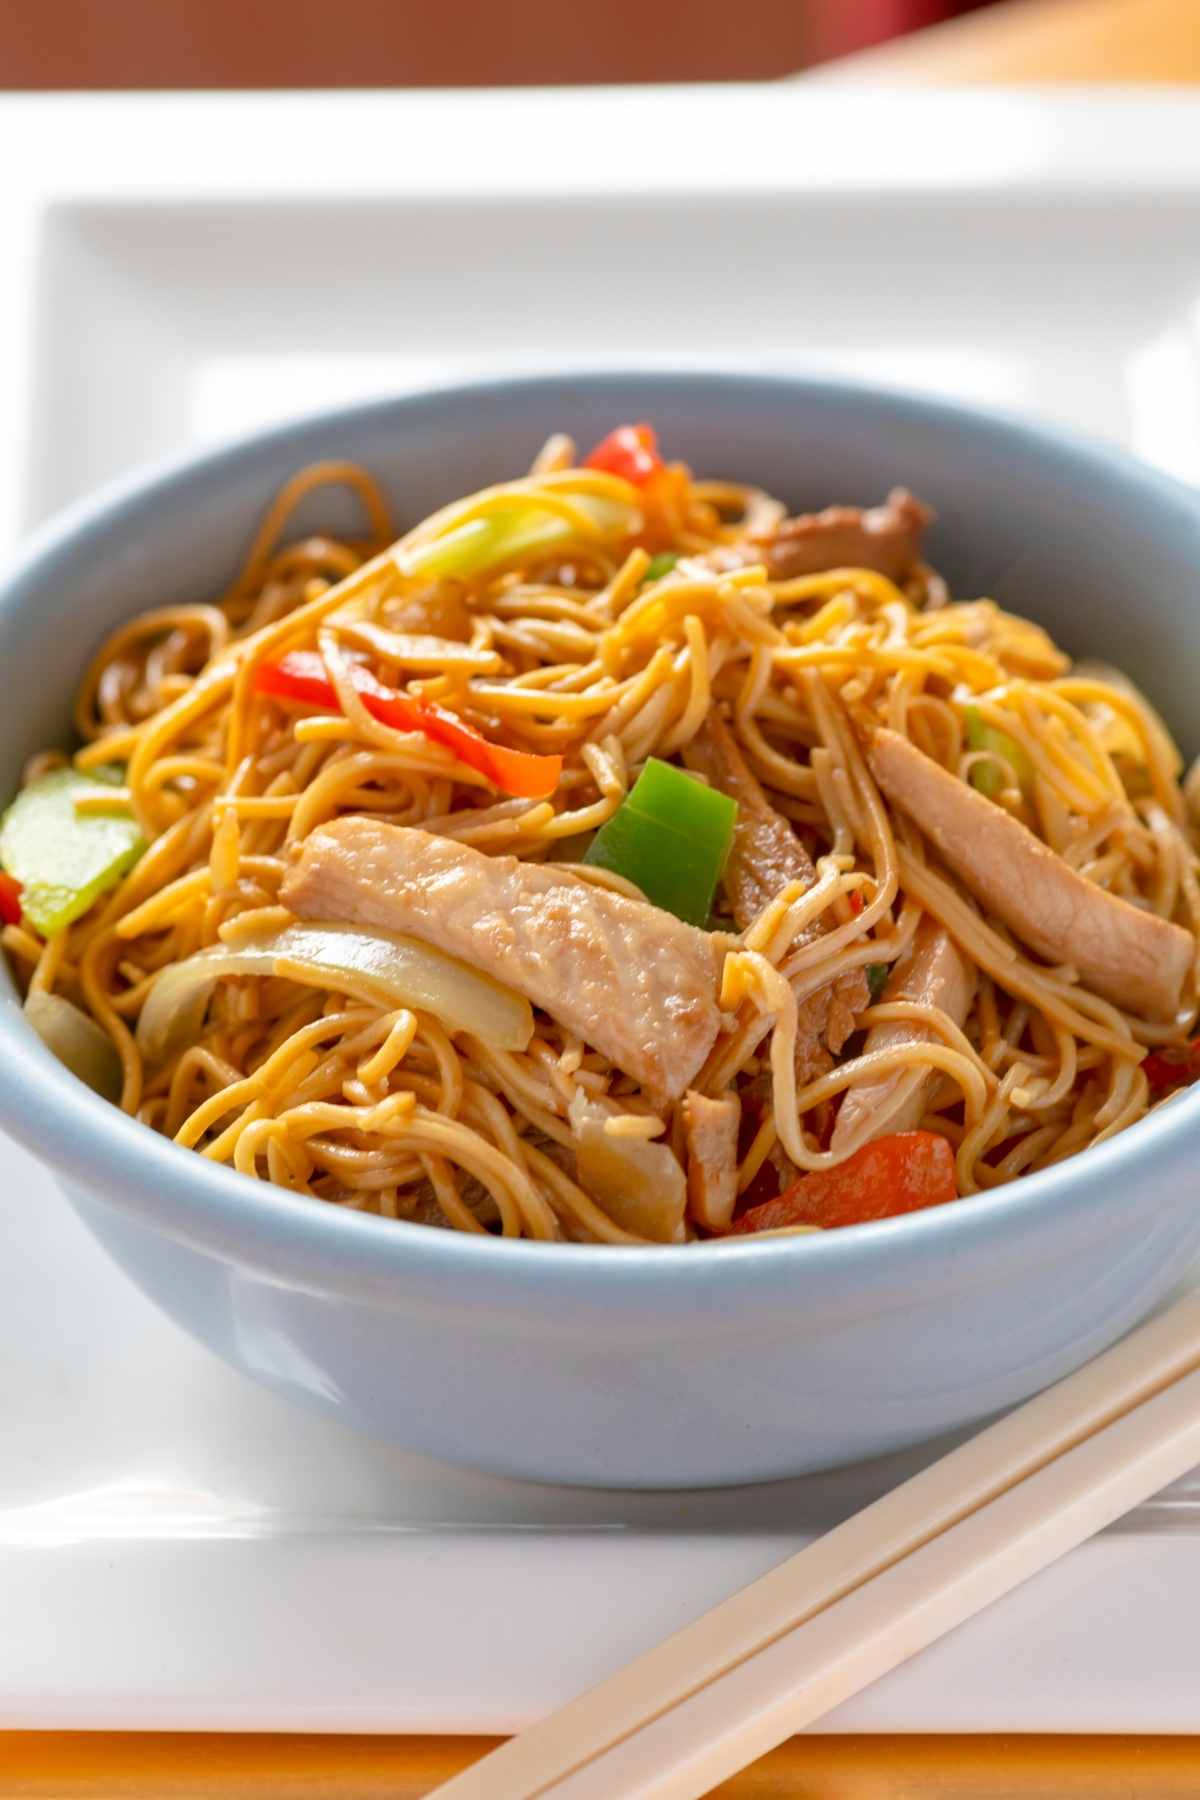 17 Popular Chinese Noodles Recipes For You to Try Tonight - IzzyCooking